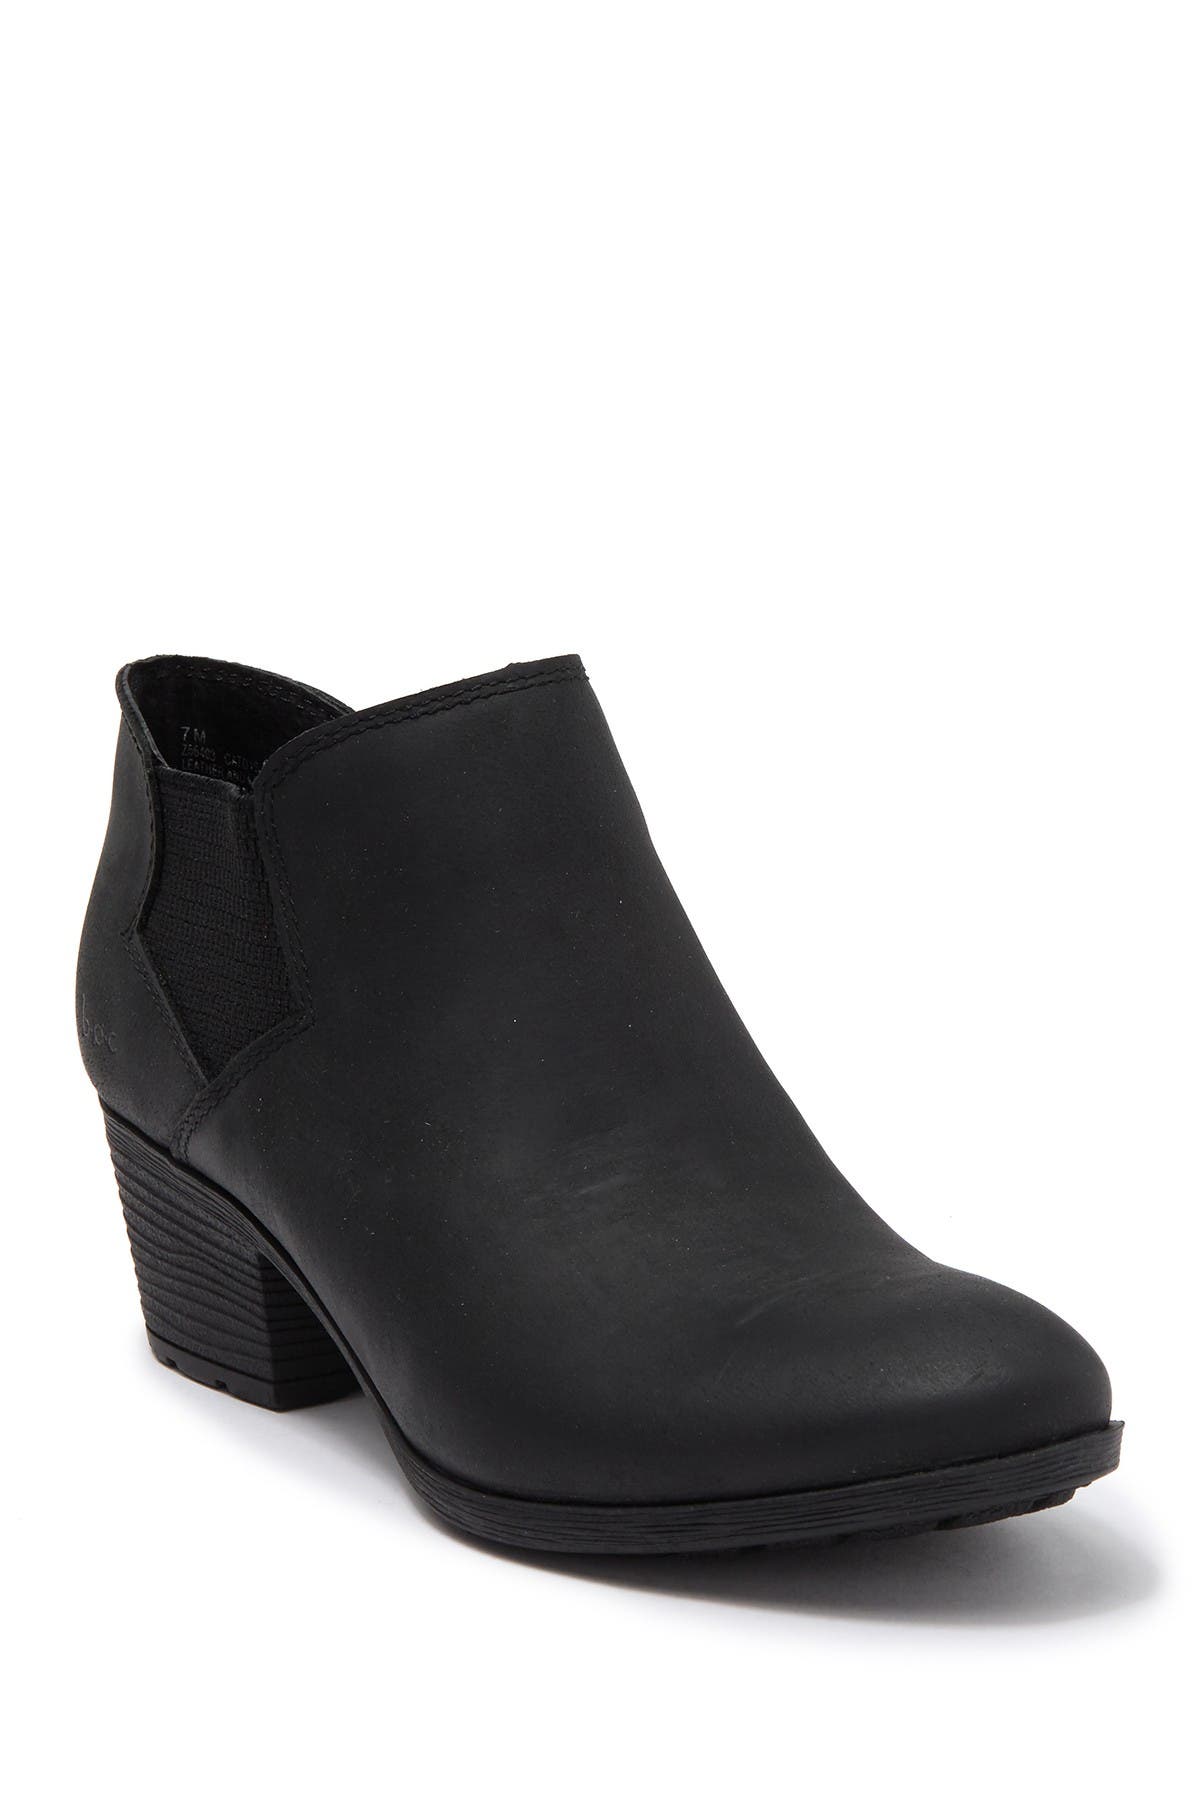 boc ankle booties